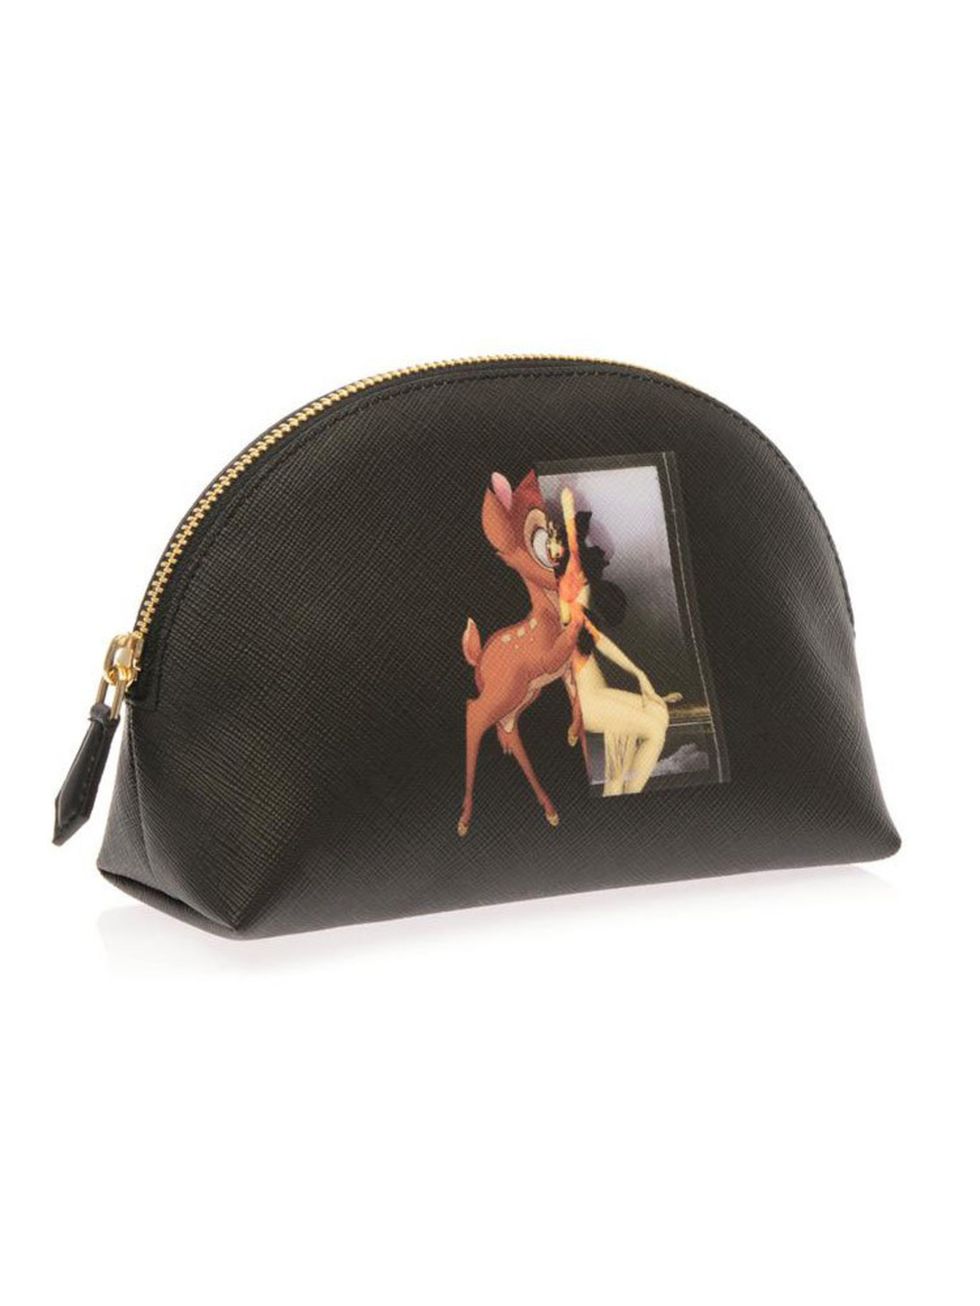 <p>First things first, if your make-up bag is looking a little worse for wear treat yourself to a new one in which you can store your shiny new buys.</p>

<p>ELLE loves Givenchy's Bambi-print make-up bag, £230 at <a href="http://www.matchesfashion.com/pro